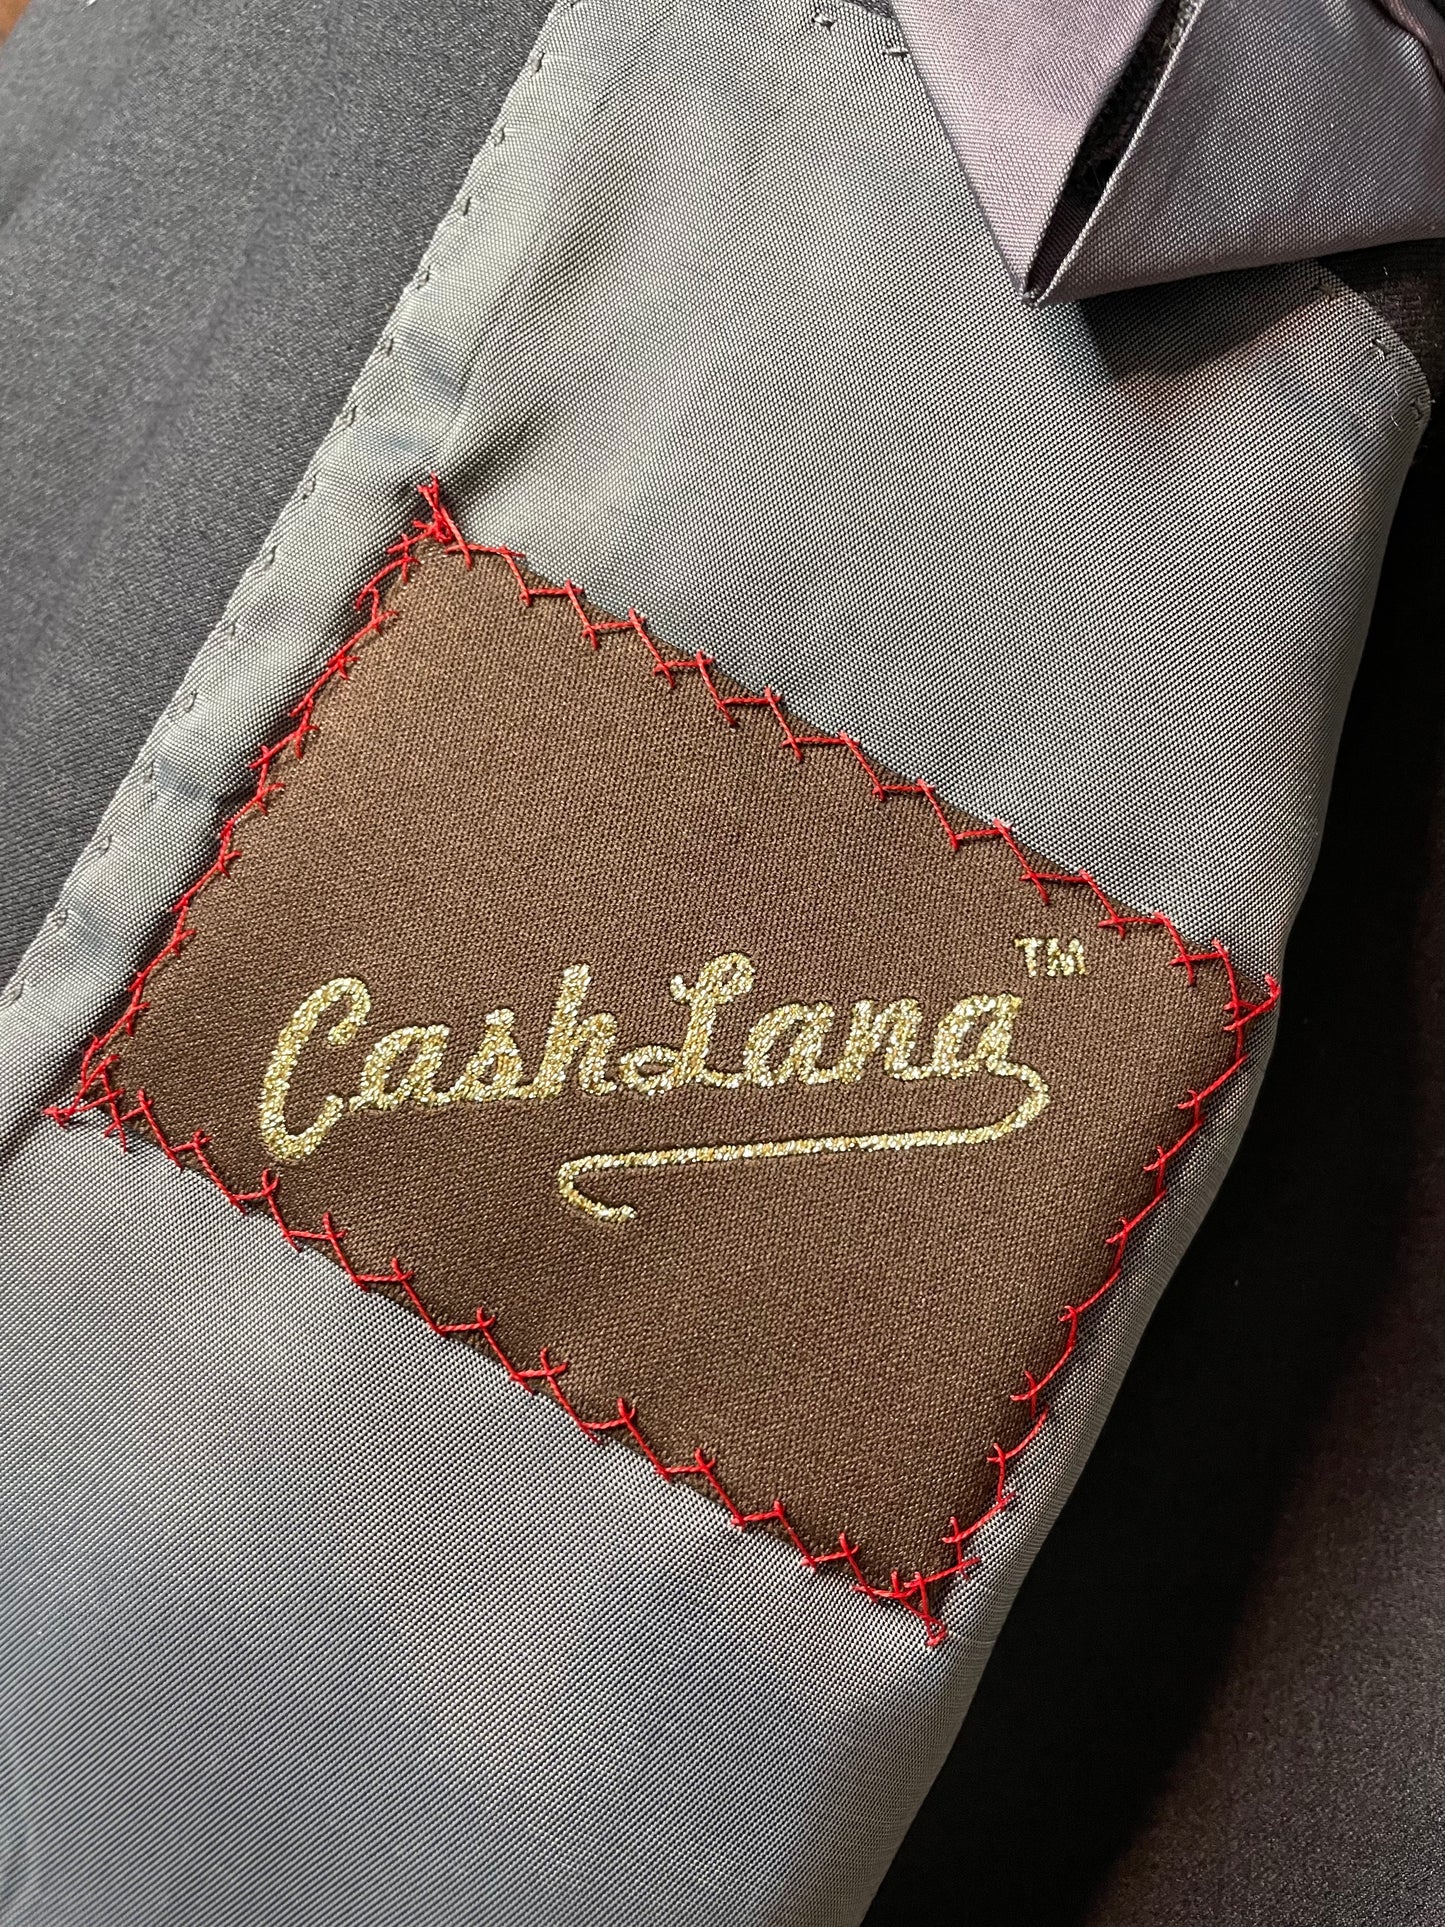 SUITCAFE Anthracite Grey Men's Suit in CashLana™ Wool